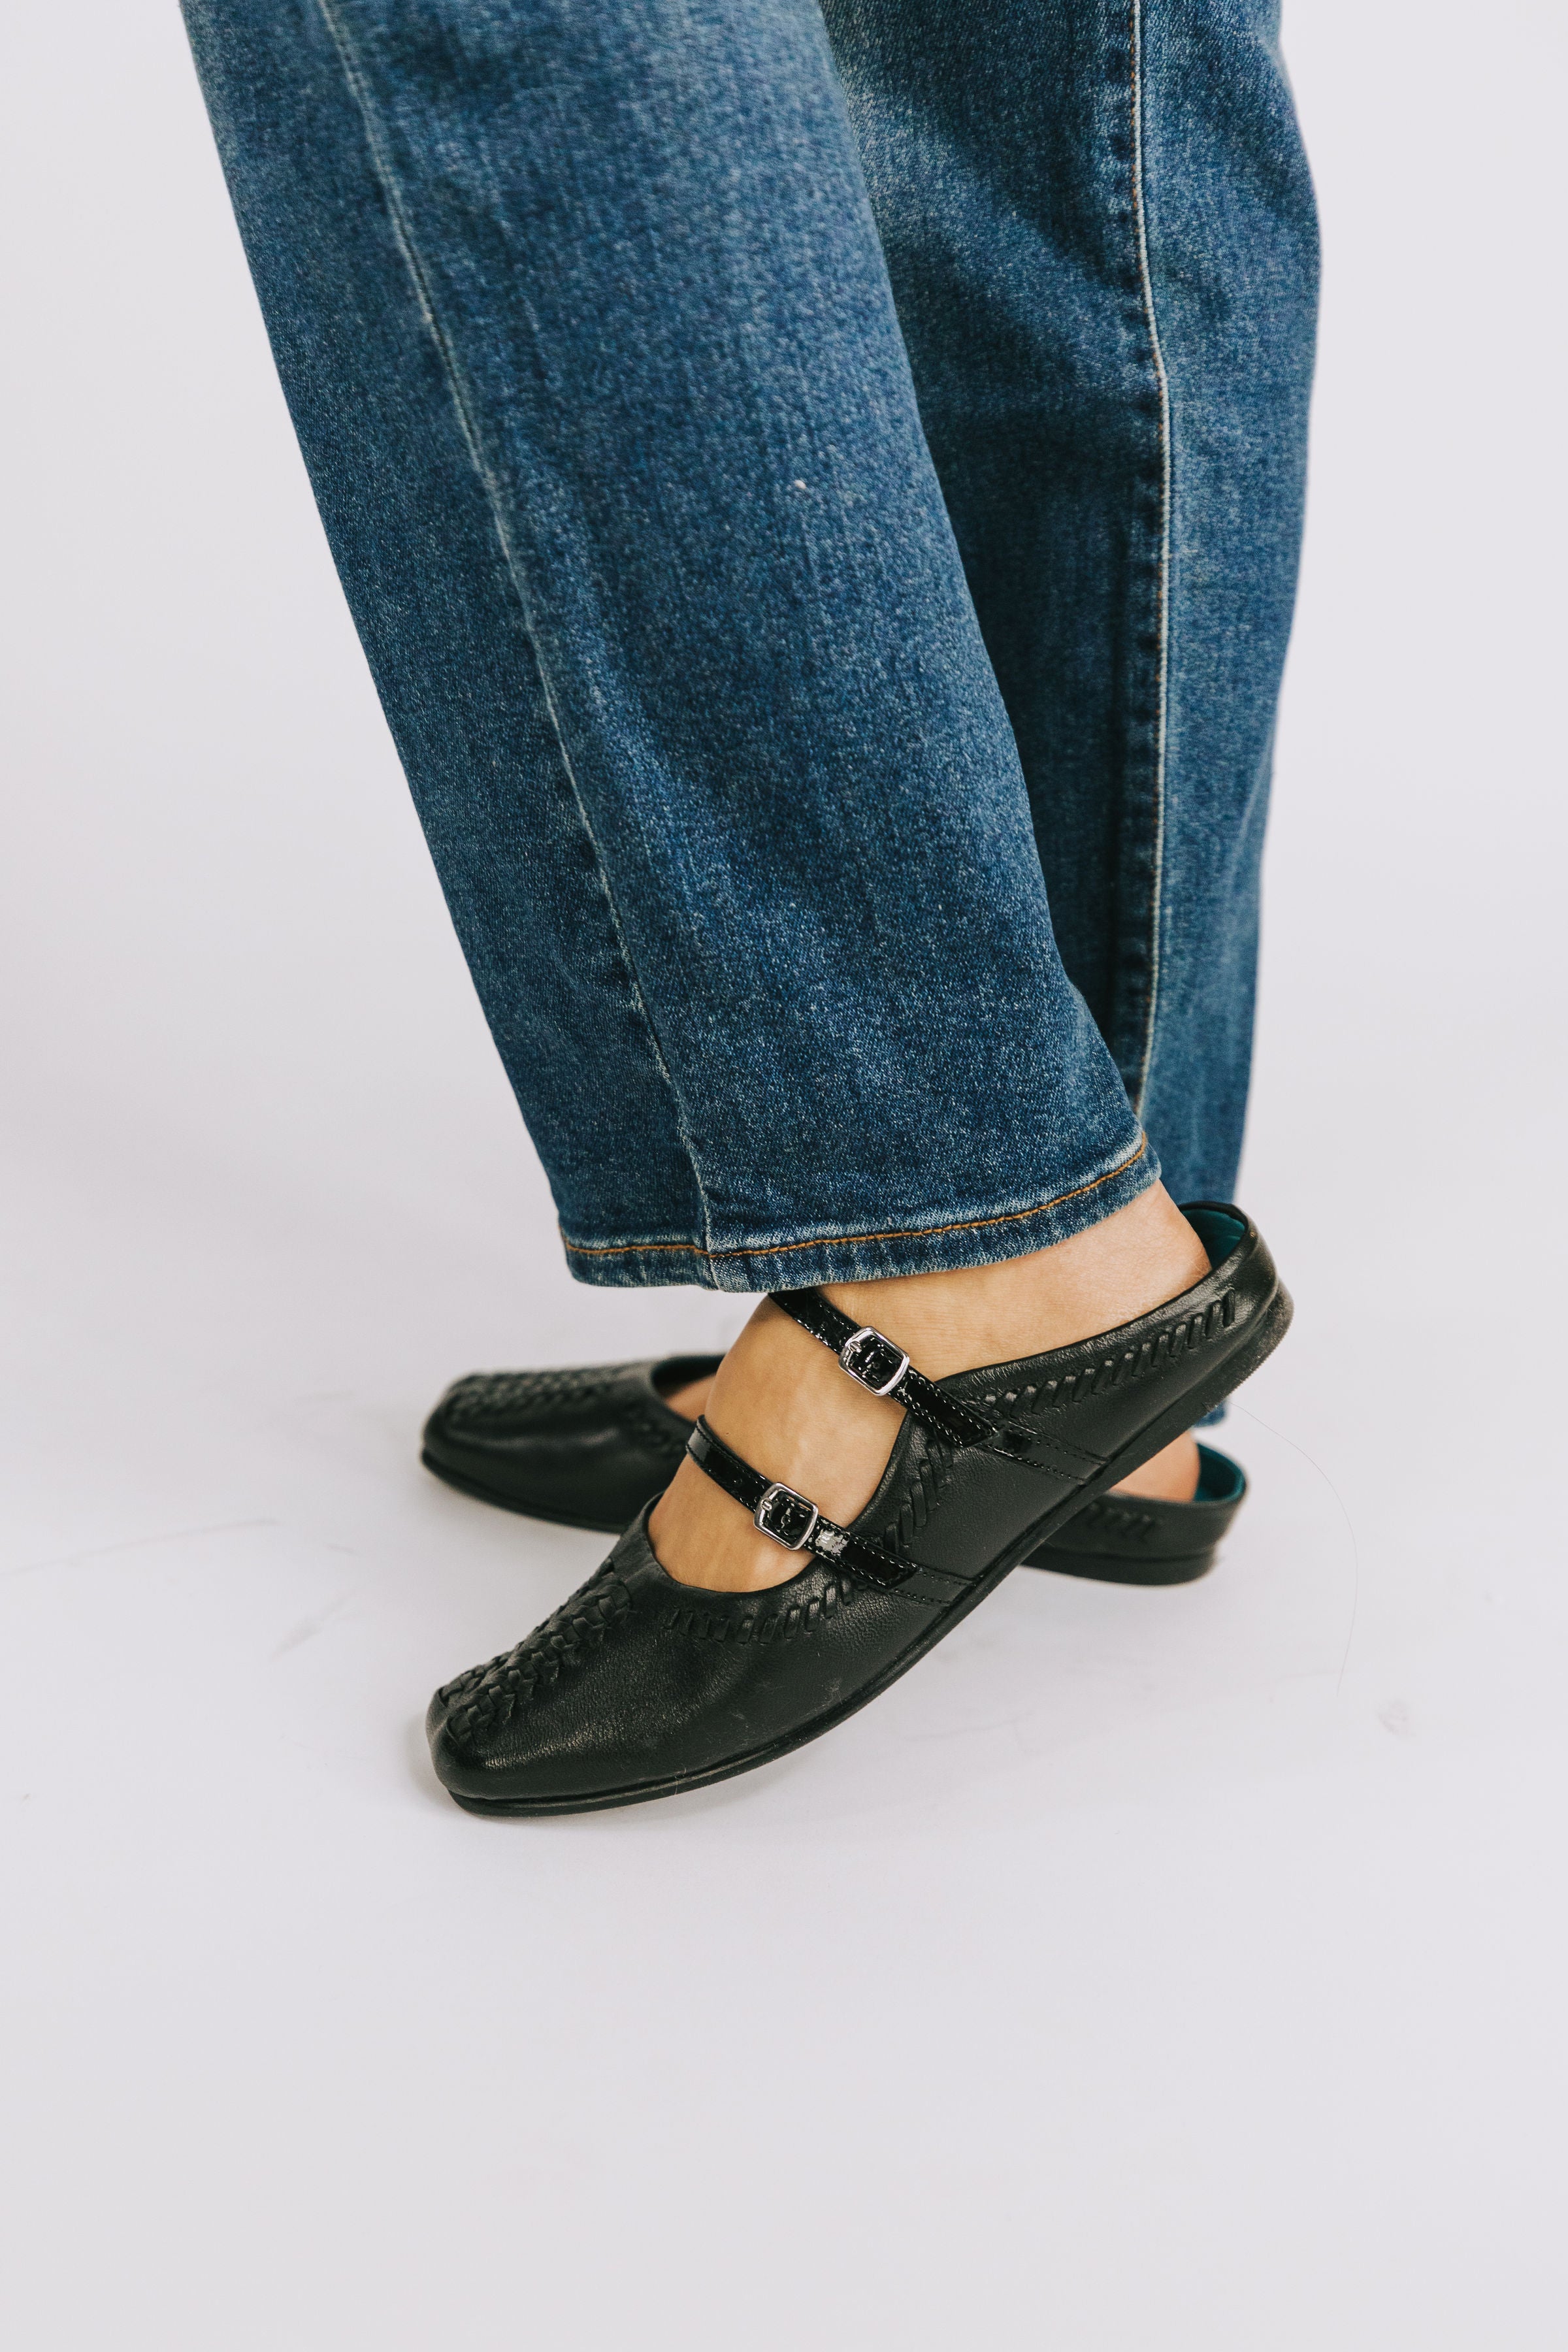 FREE PEOPLE - Diana Double Strap Flat